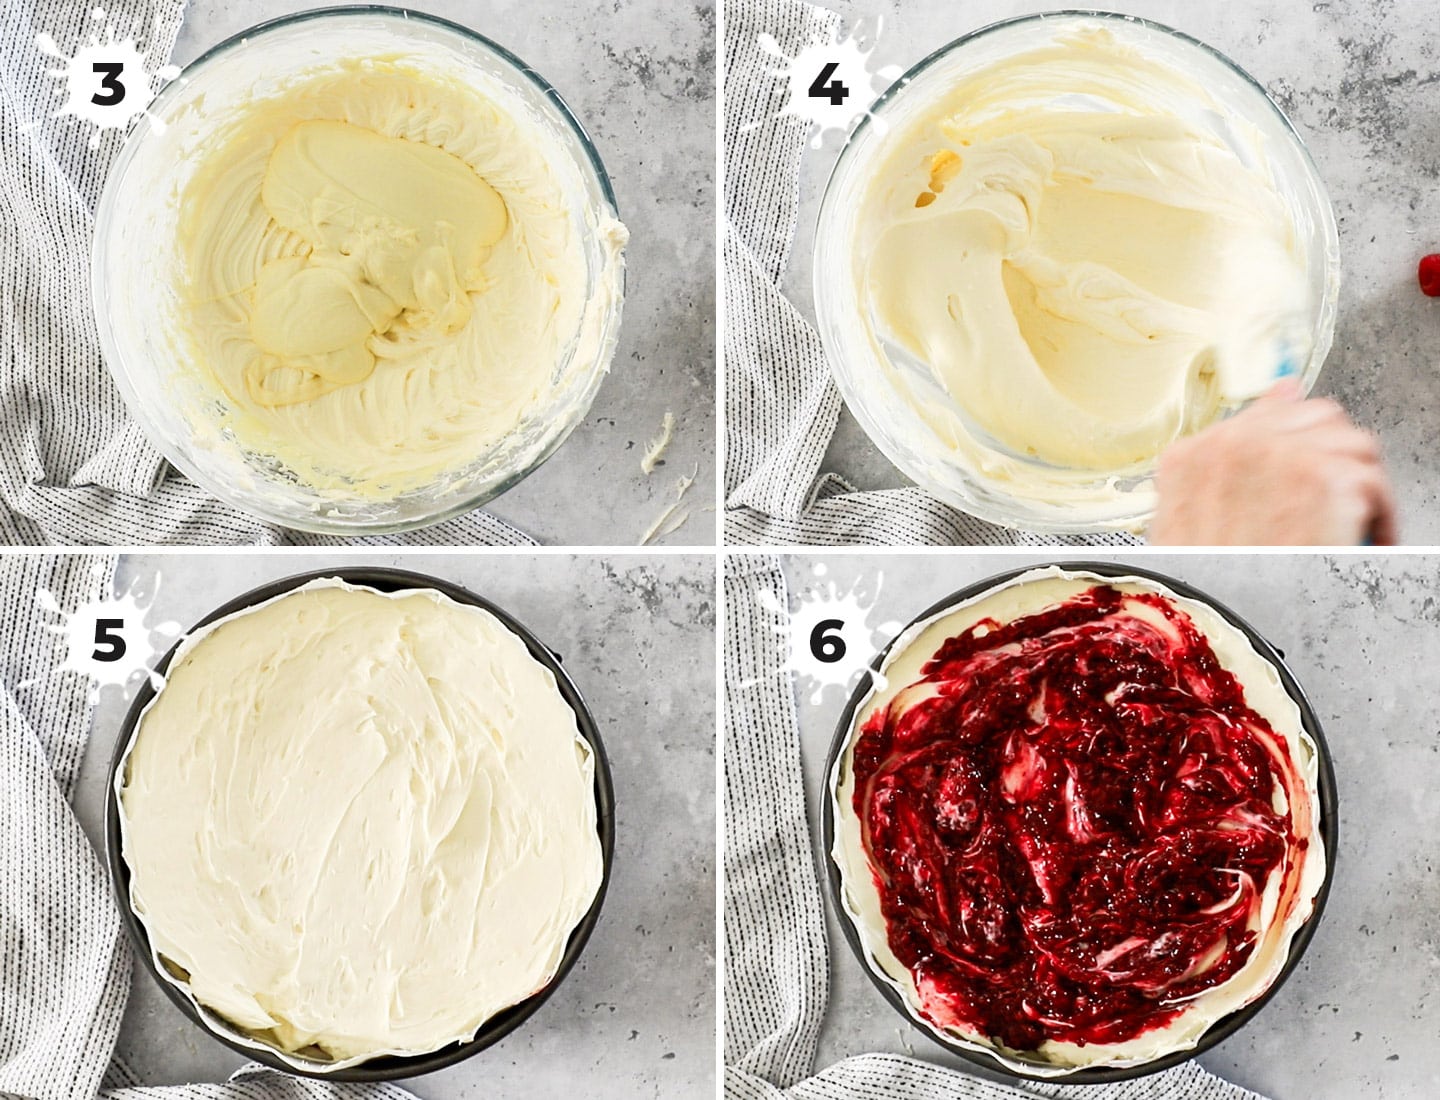 A collage showing how to make and assemble the cheesecake.